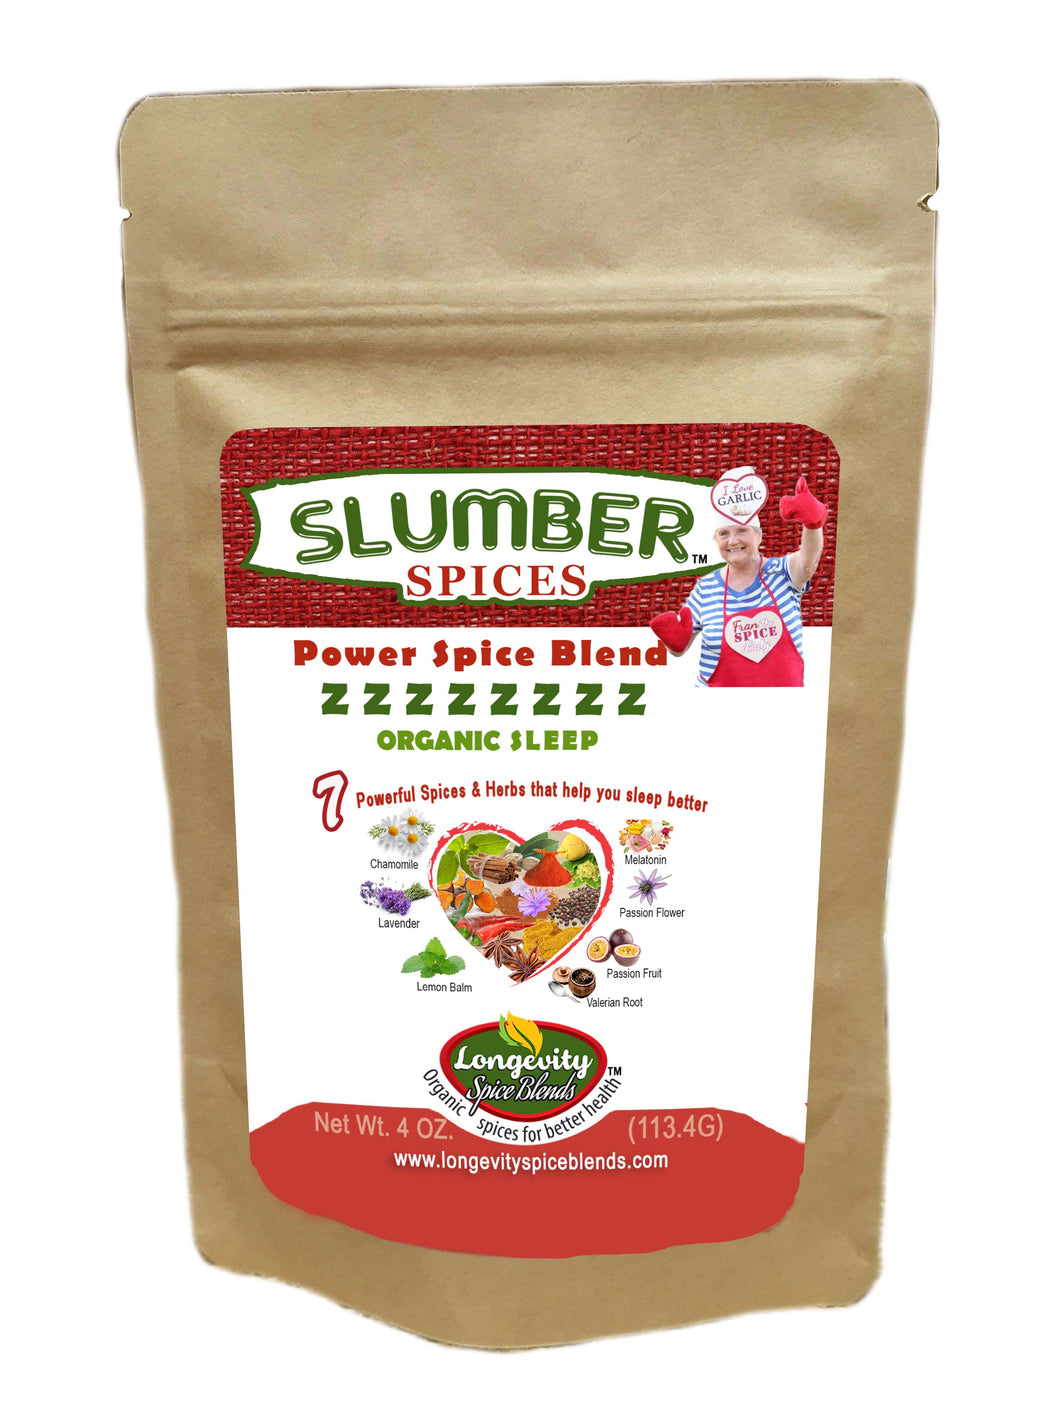 Sleep | Slumber Spices - Promote Restful Sleep with  Spices & Herbs